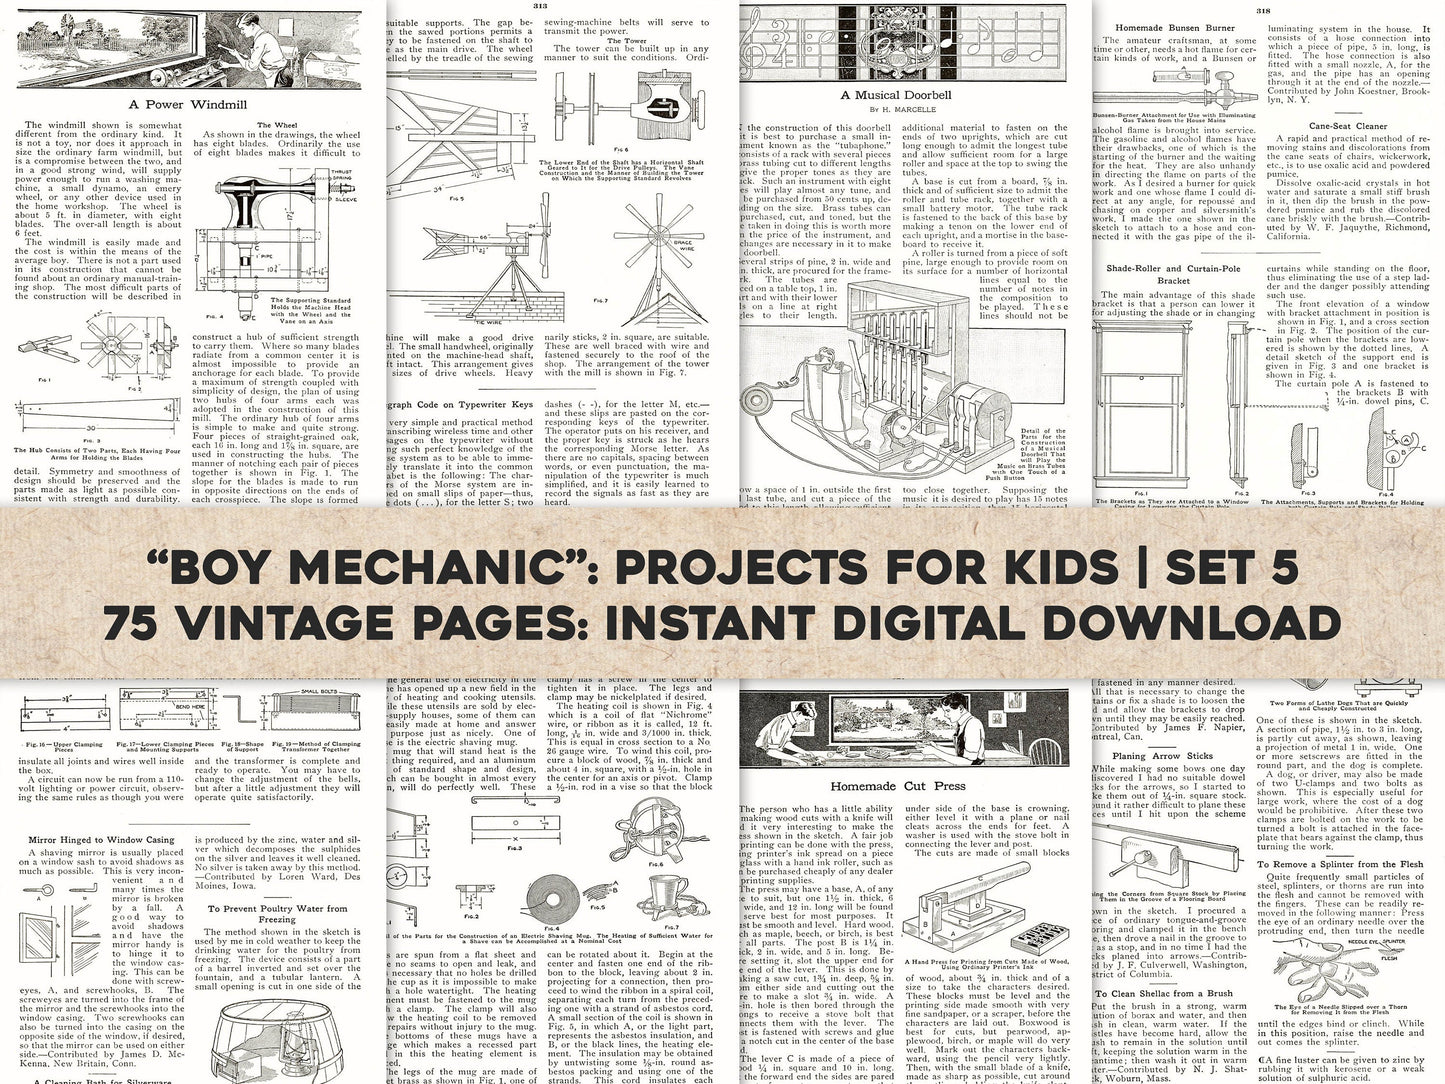 The Boy Mechanic 1000 Things for Boys to do Set 6 [72 Images]